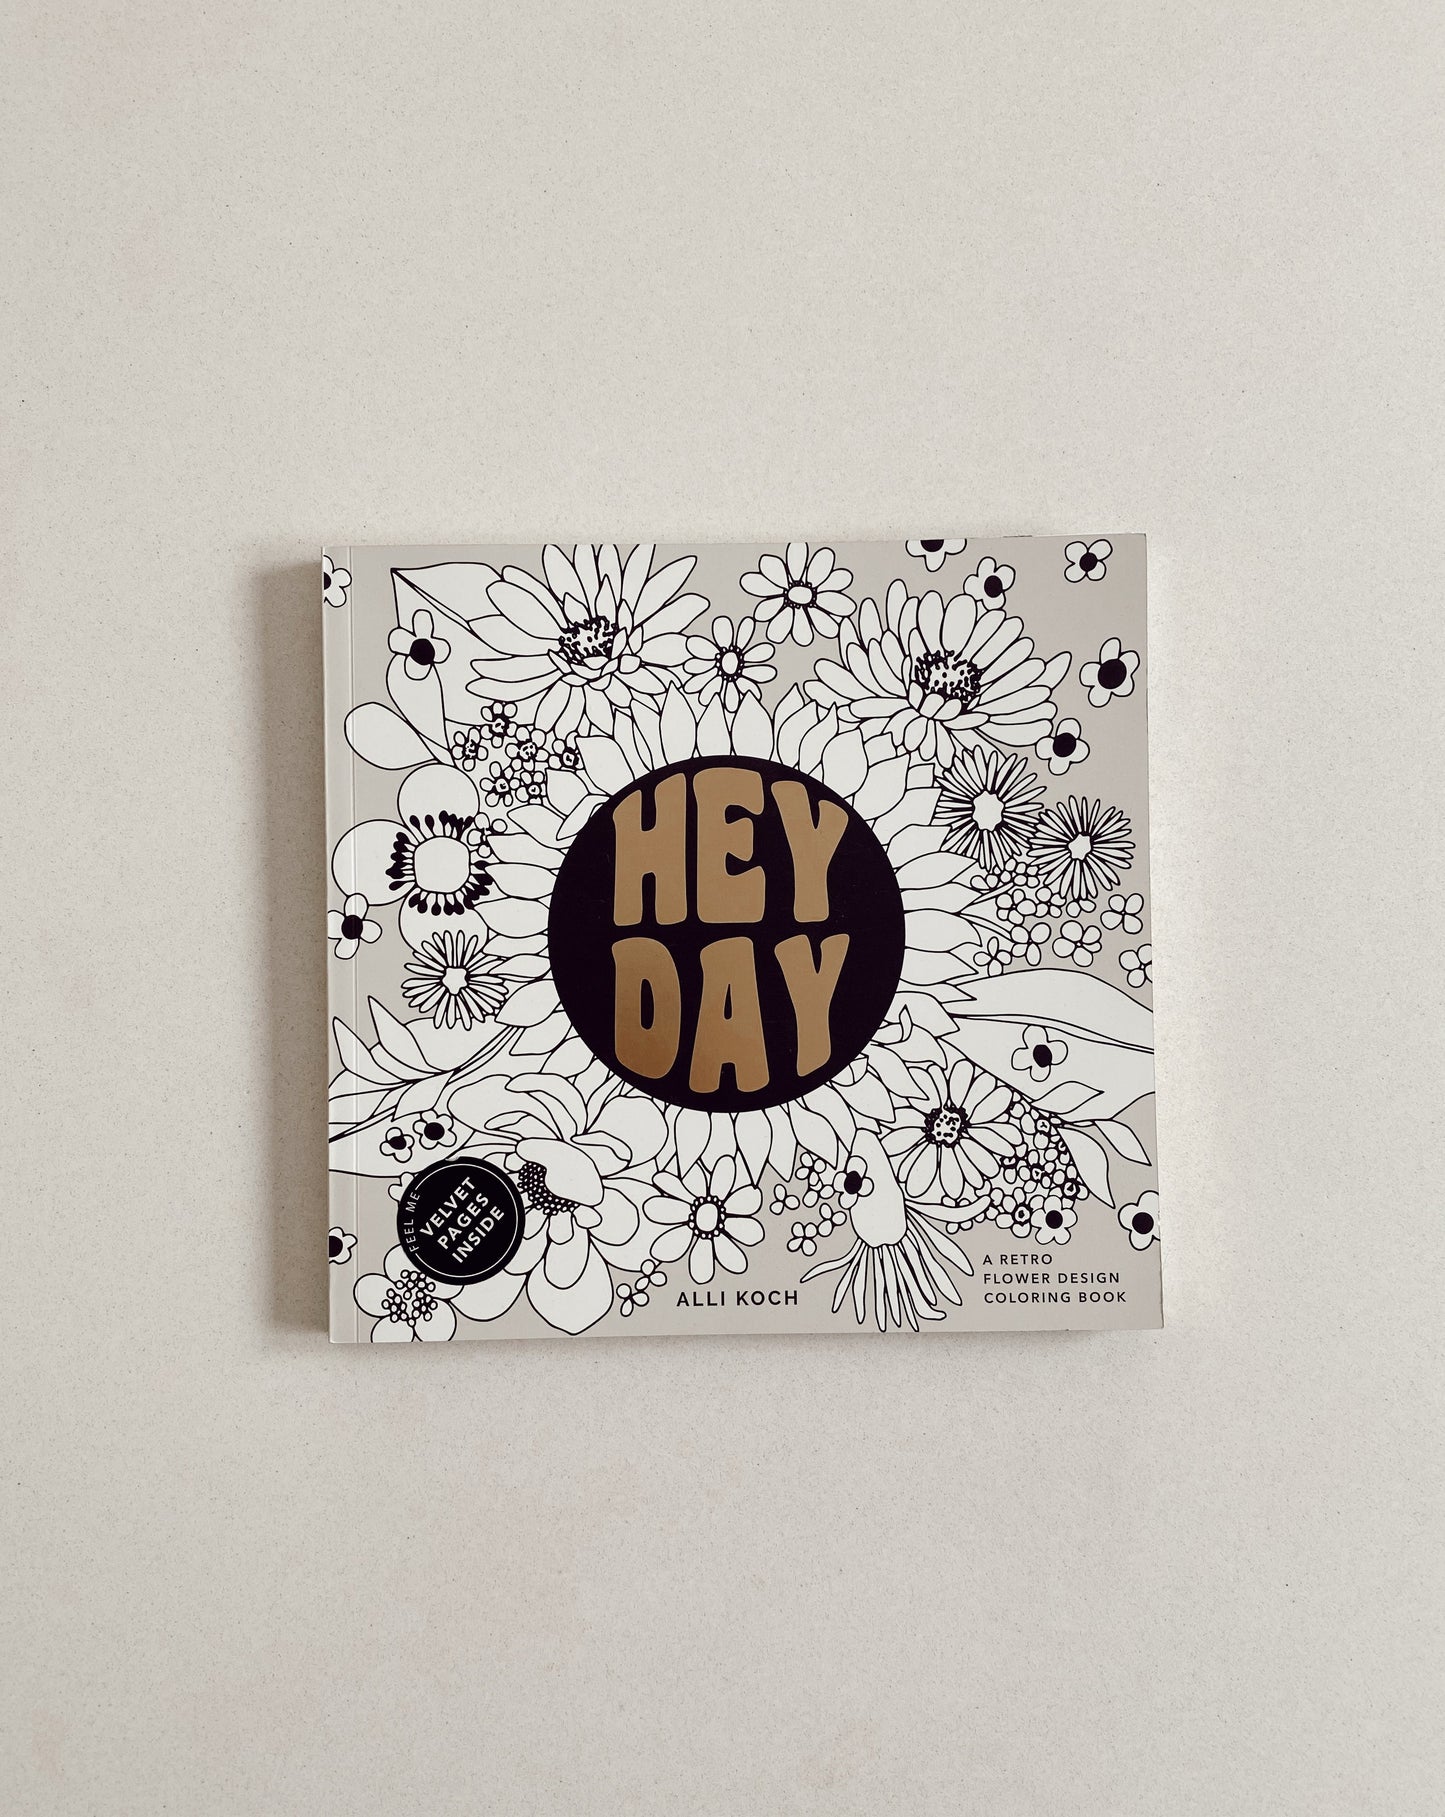 Hey Day Coloring book